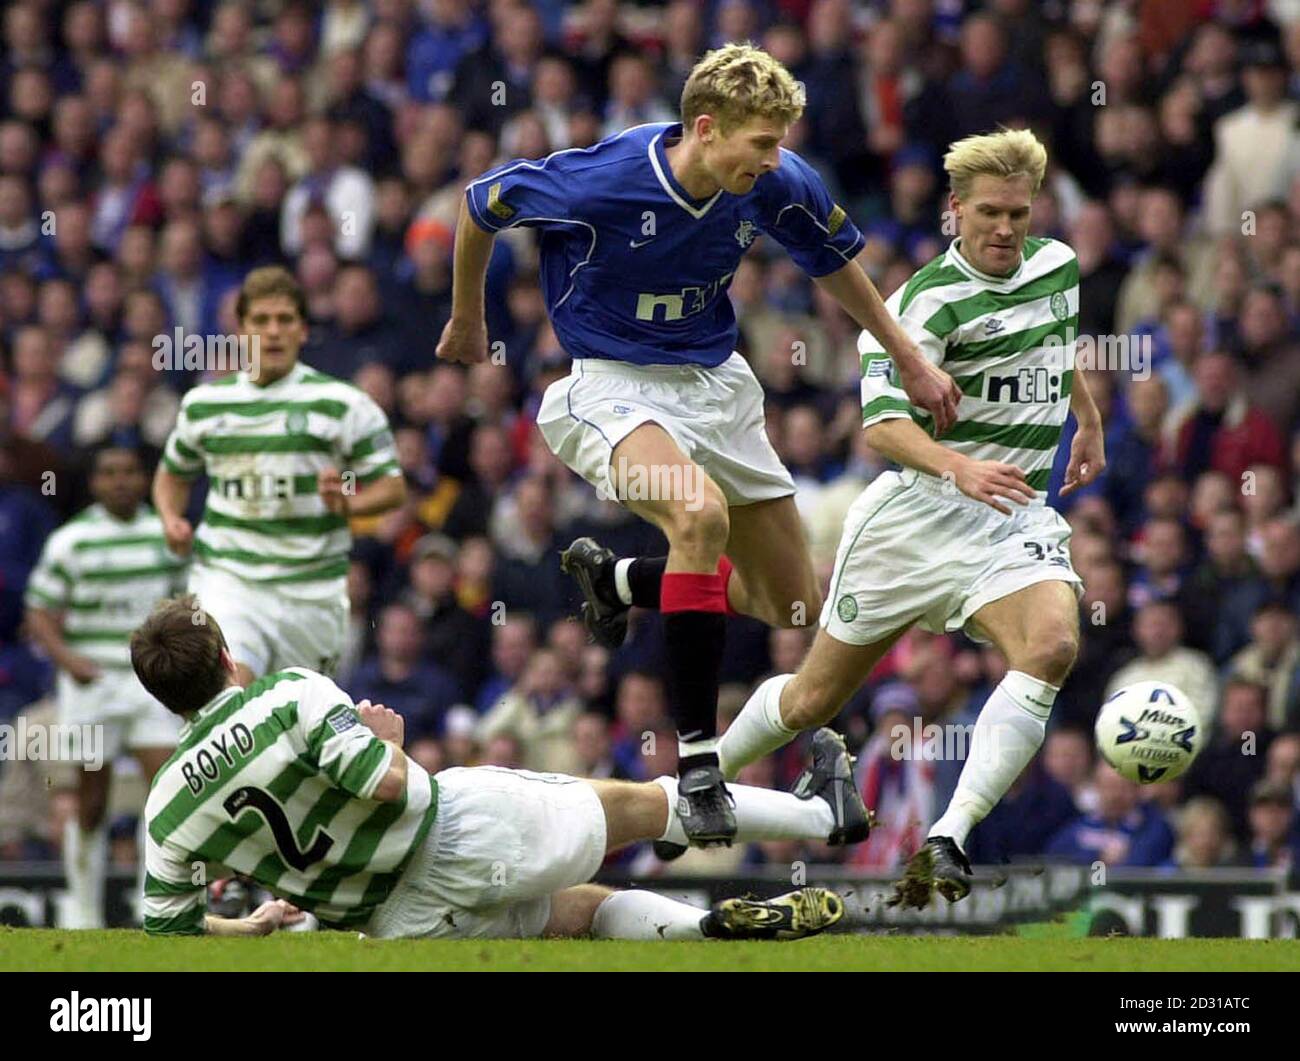 Rangers new signing Tore Andre Flo jumps past Celtic's Tom Boyd and Johan Mjallby during their Scottish Premier League match at Ibrox Stadium. Final Score: Rangers 5 Celtic 1. Stock Photo